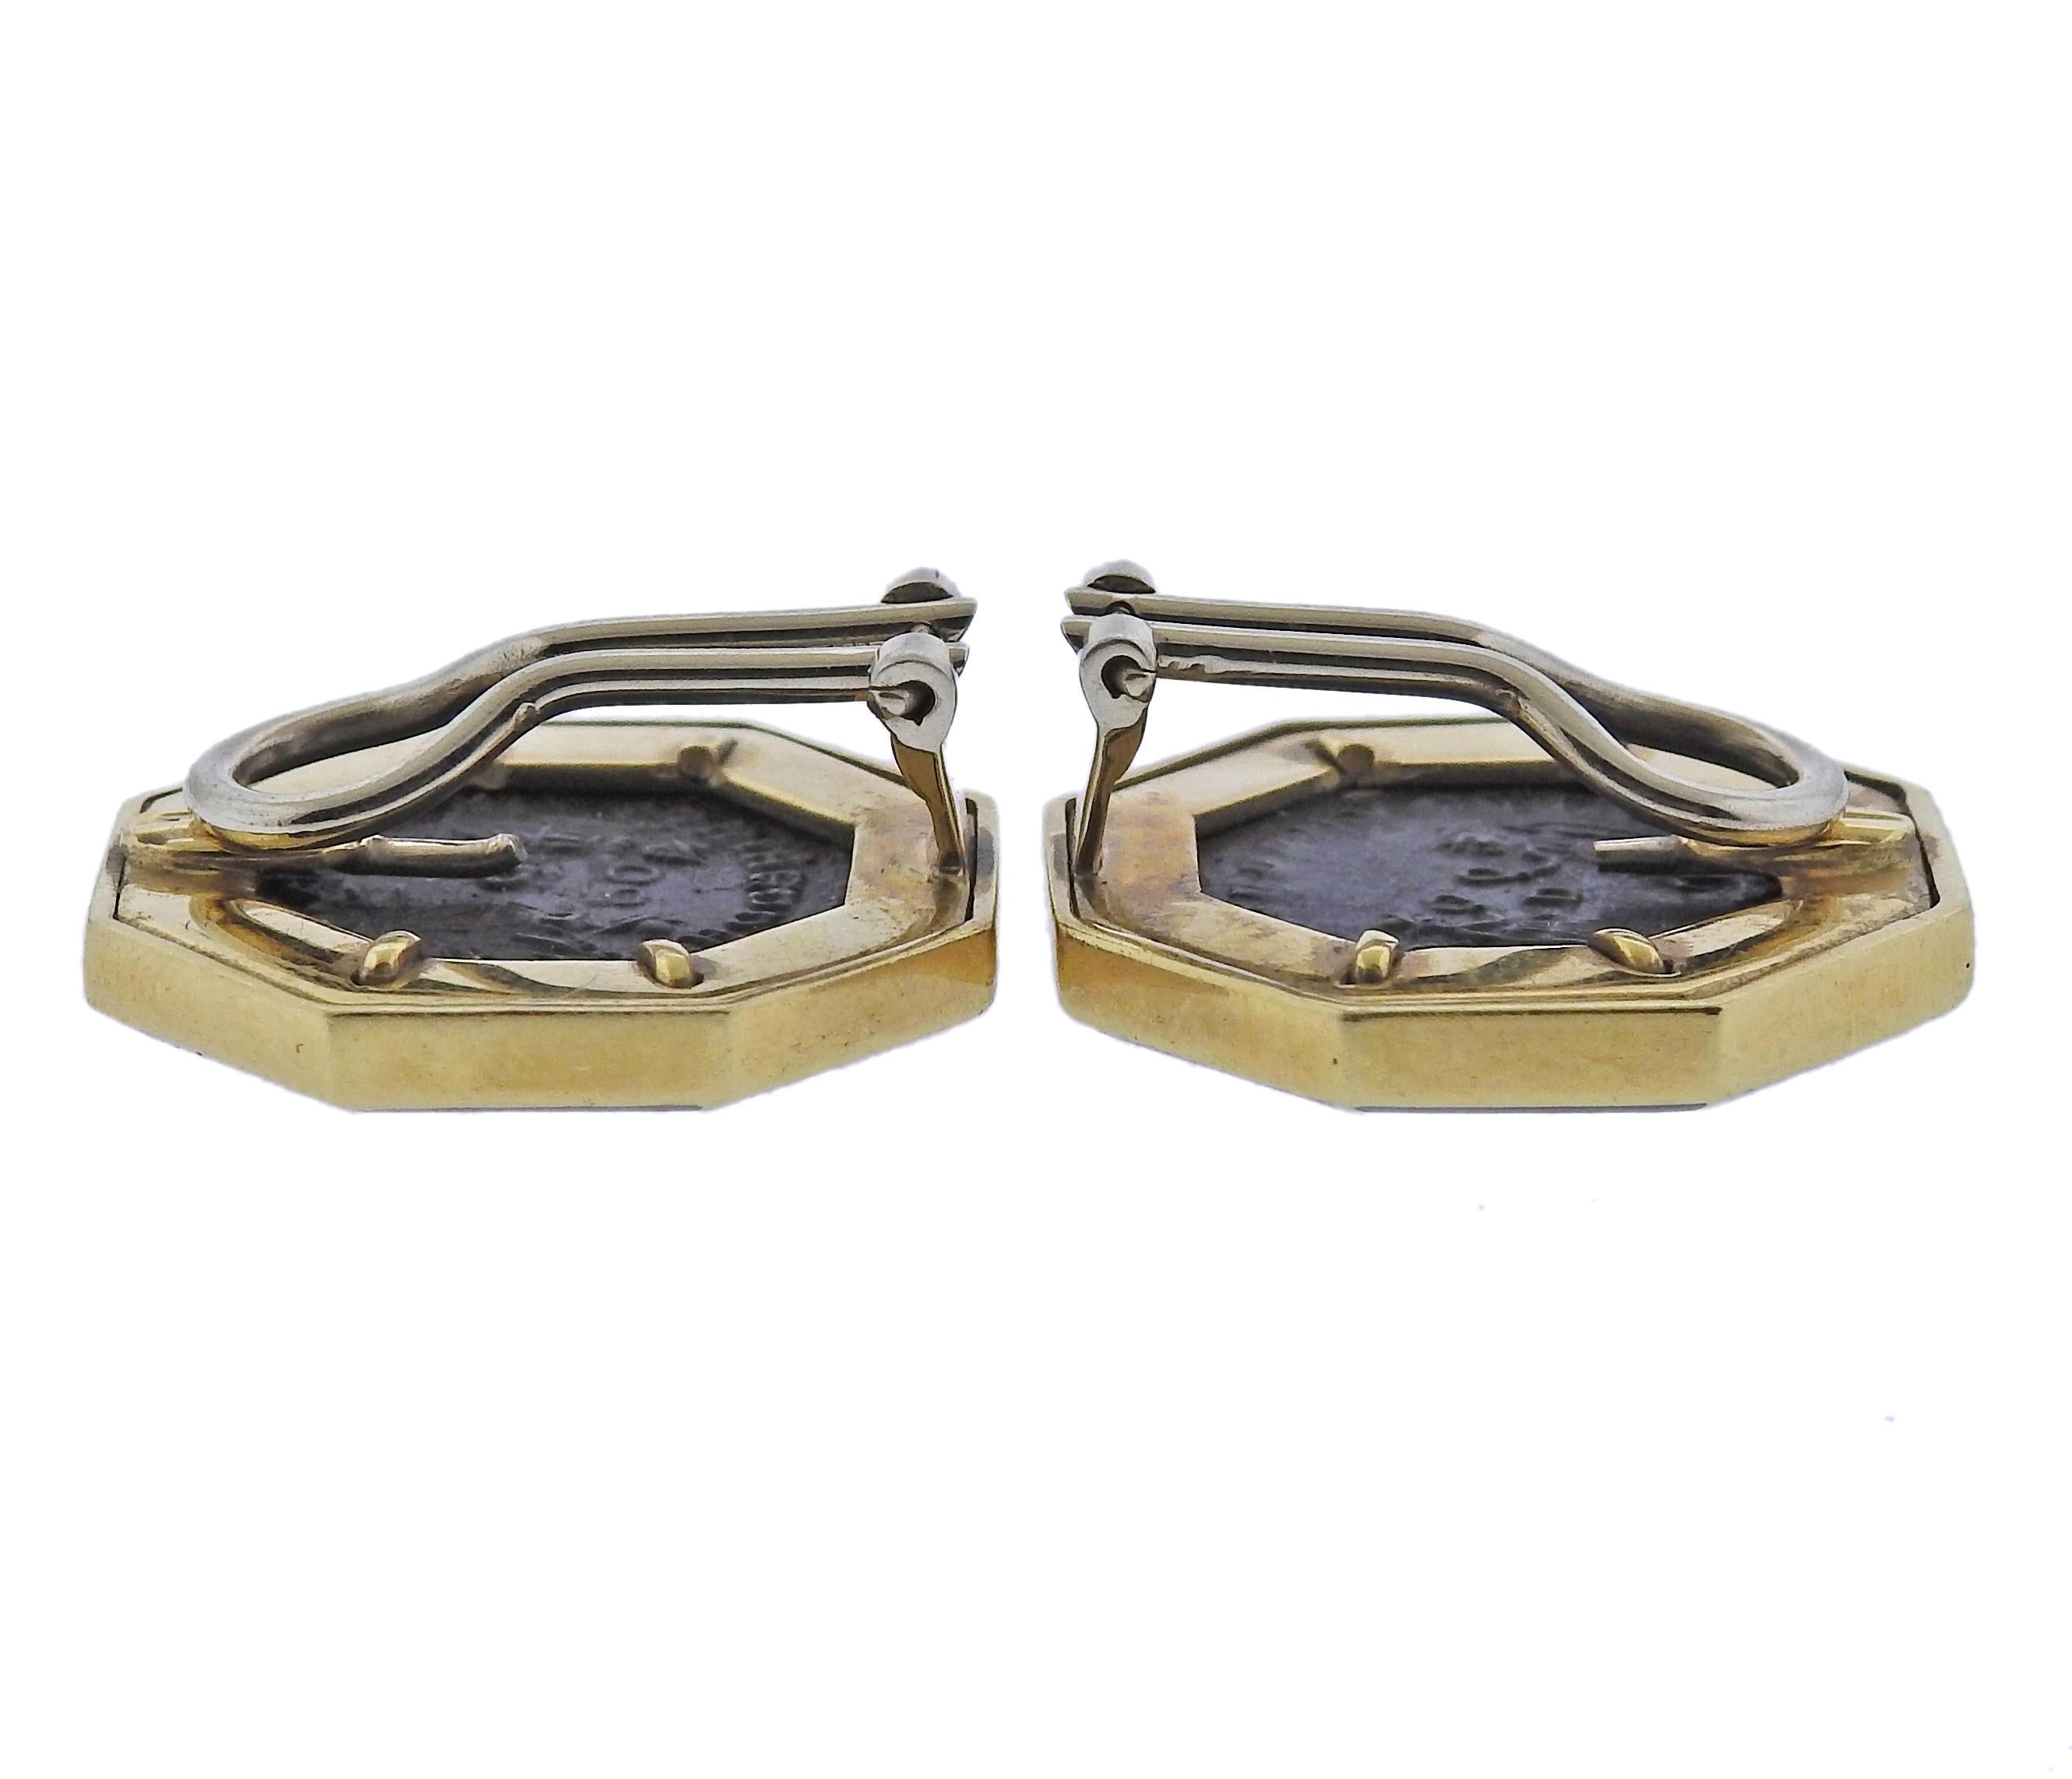 Pair of 18k gold earrings, with coins in the center, surrounded with approx. 0.34ctw in diamonds and enamel. Earrings are 22mm x 22mm. Marked: 750. Weight - 19.7 grams.